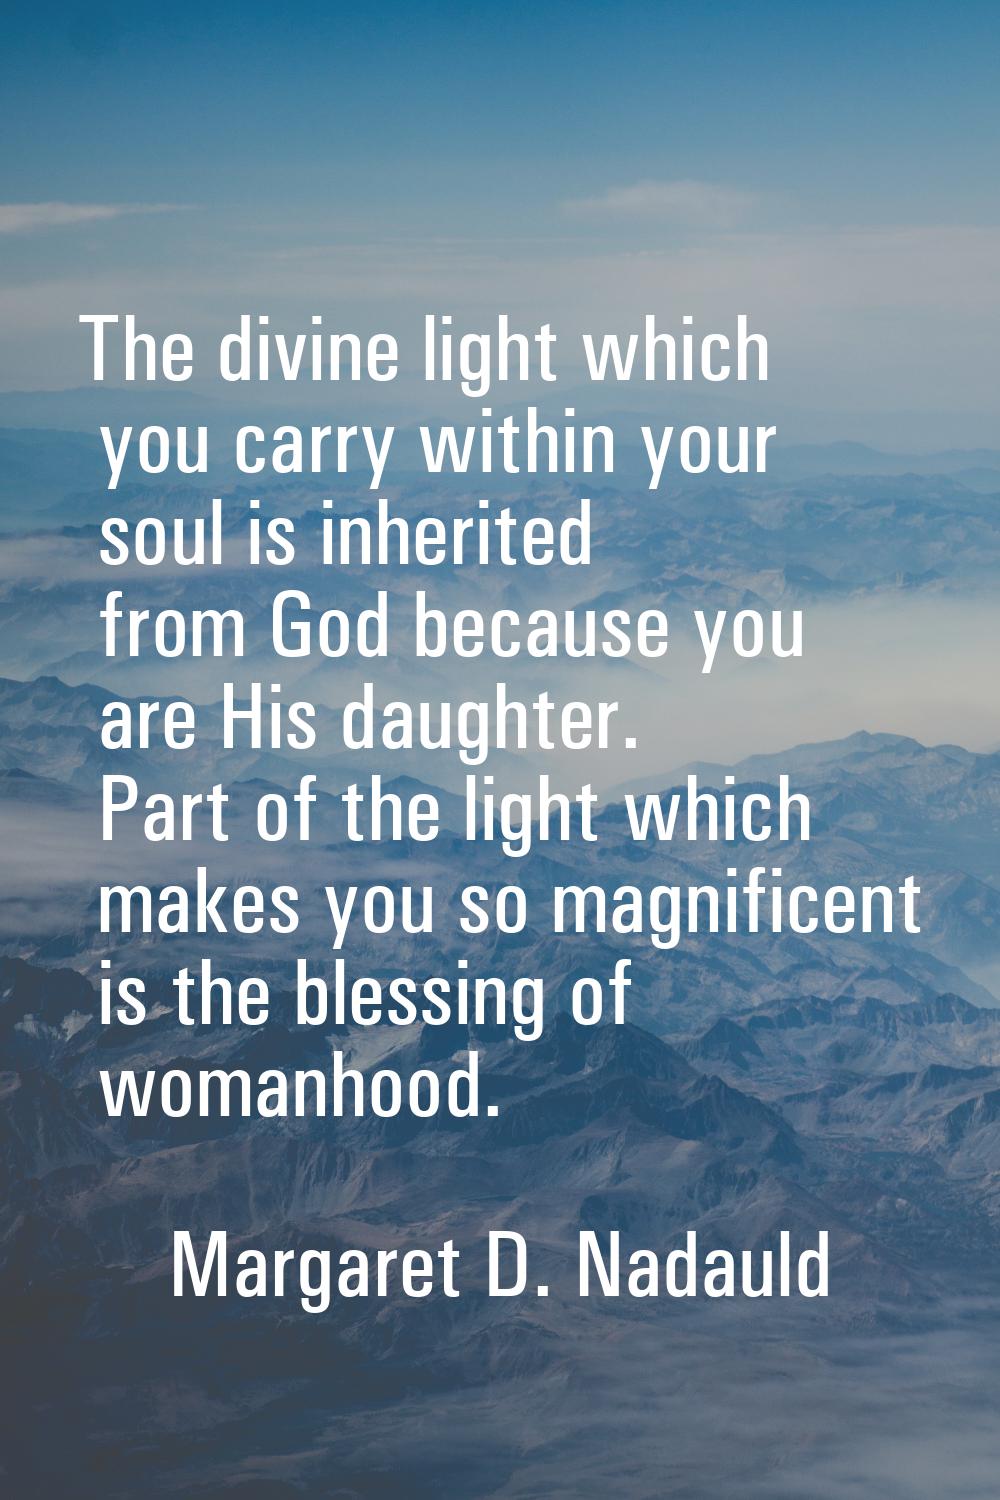 The divine light which you carry within your soul is inherited from God because you are His daughte